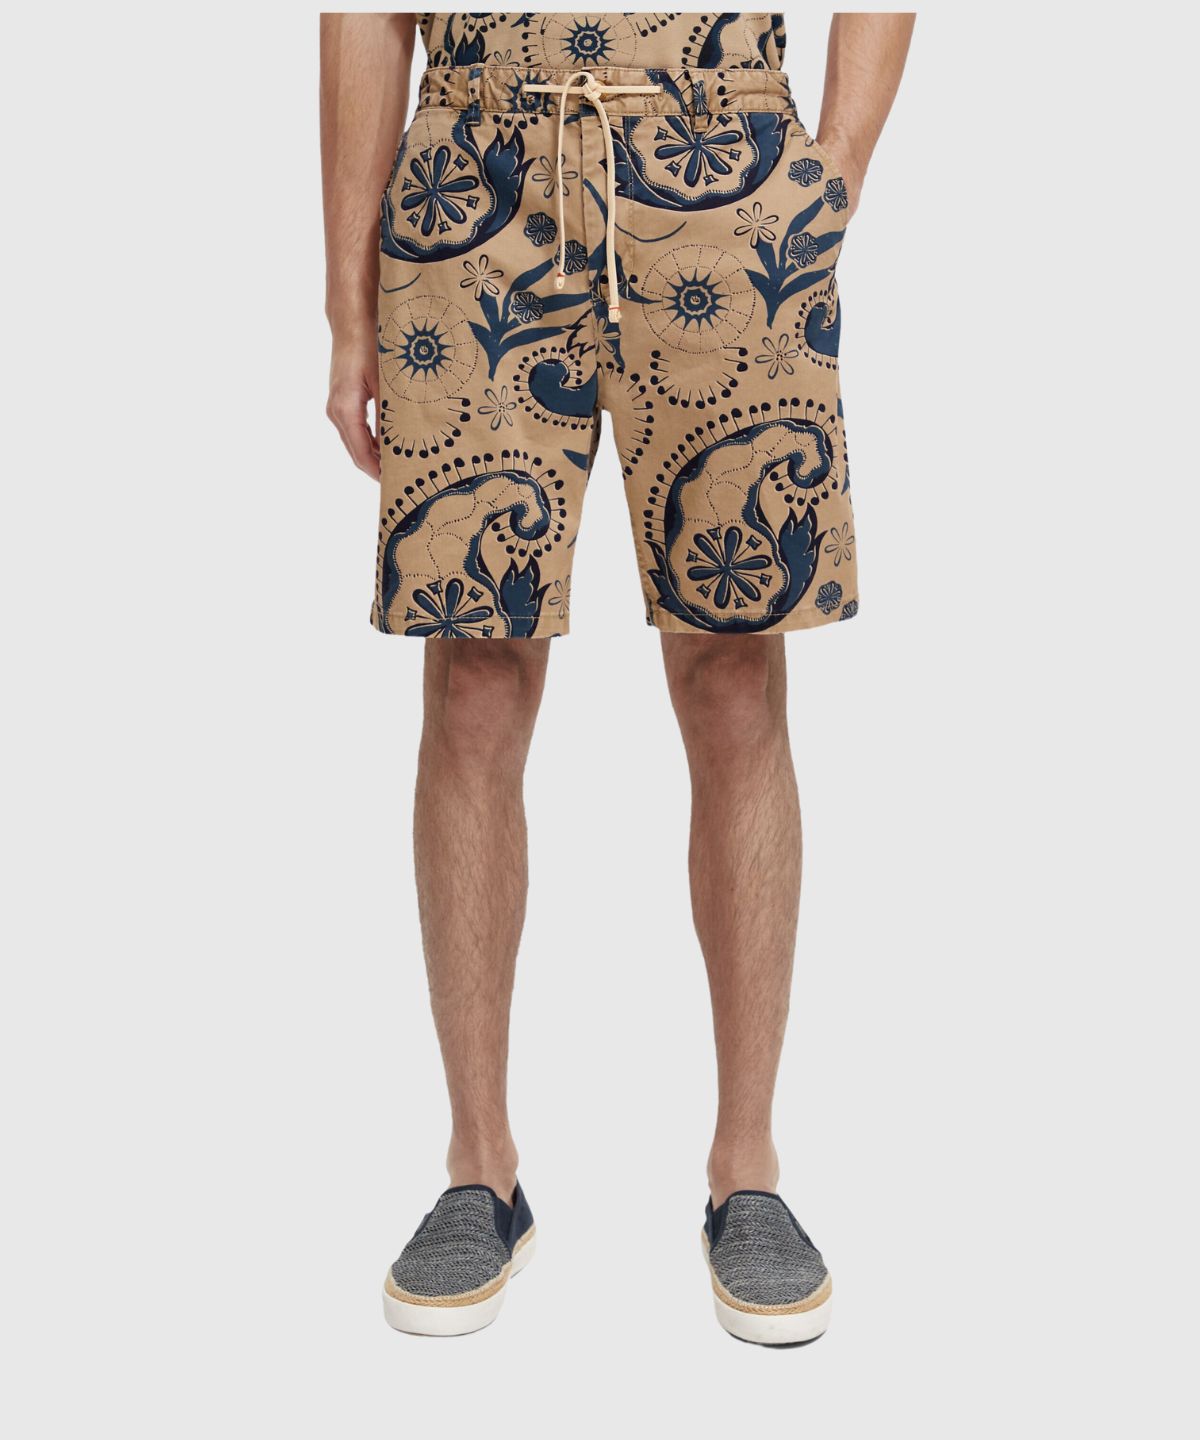 Fave – Printed washed twill shorts